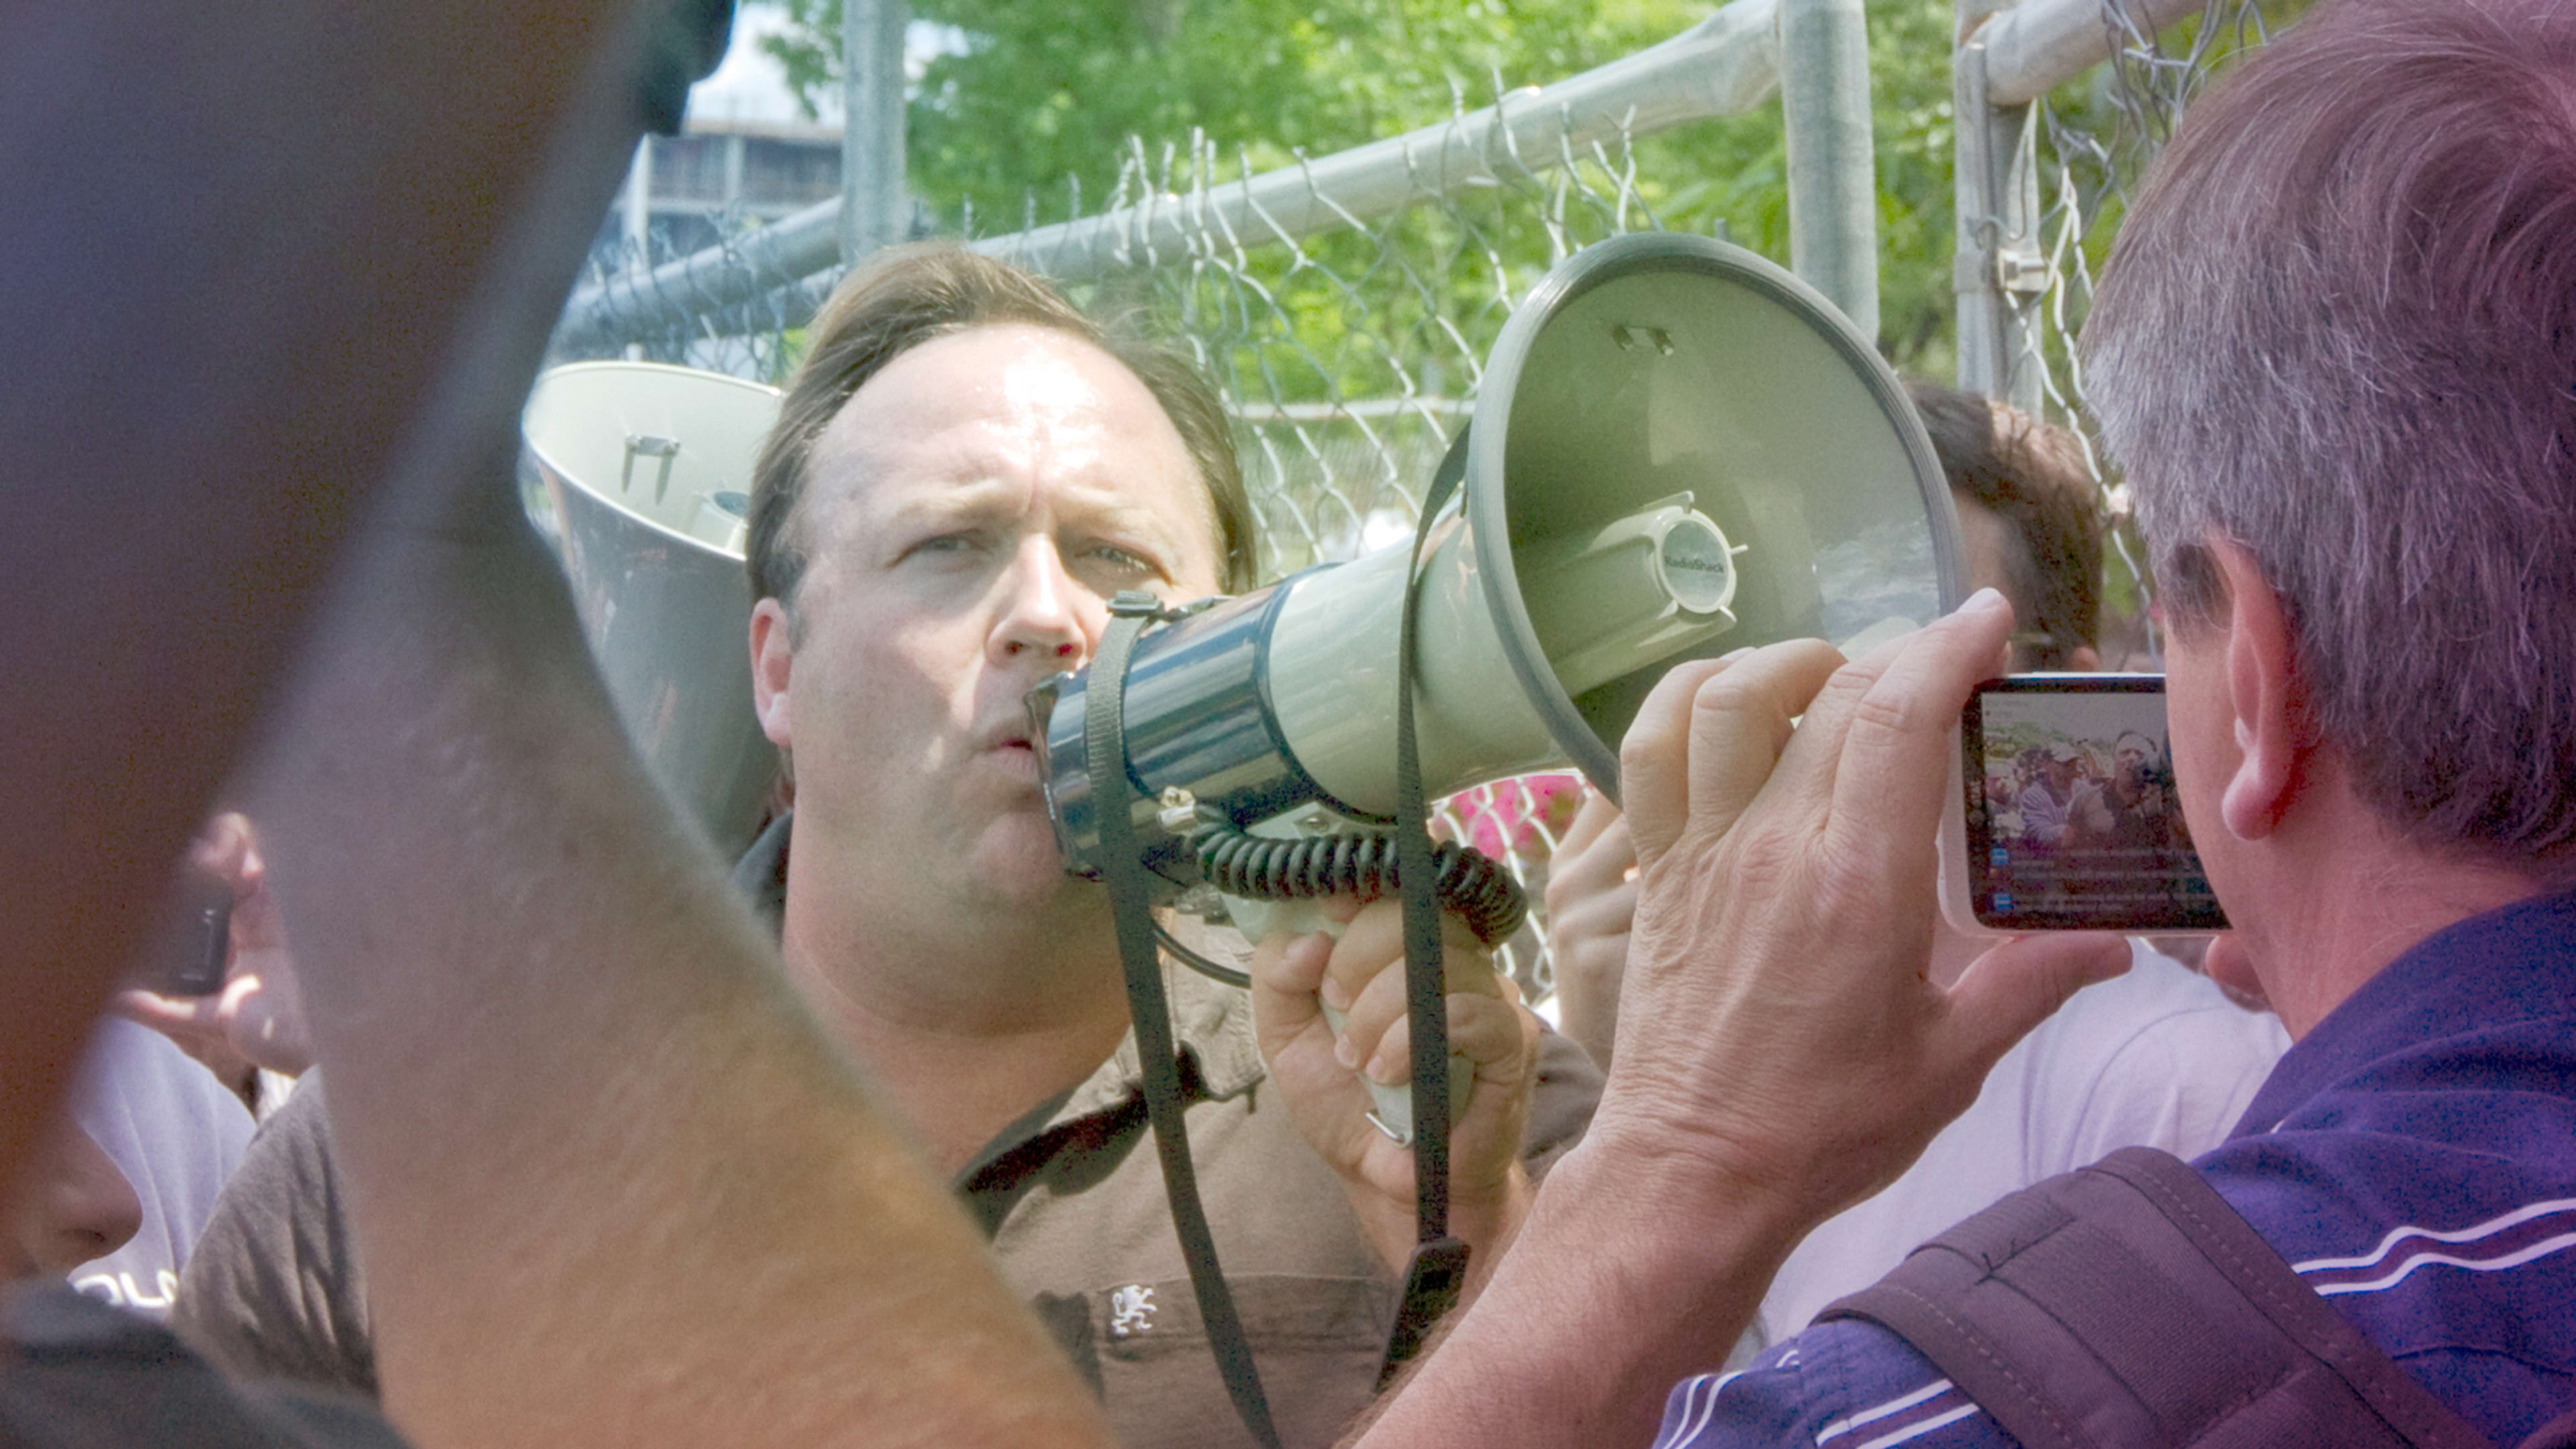 Apple’s decision to pull InfoWars podcasts could really hurt Alex Jones’s bottom line